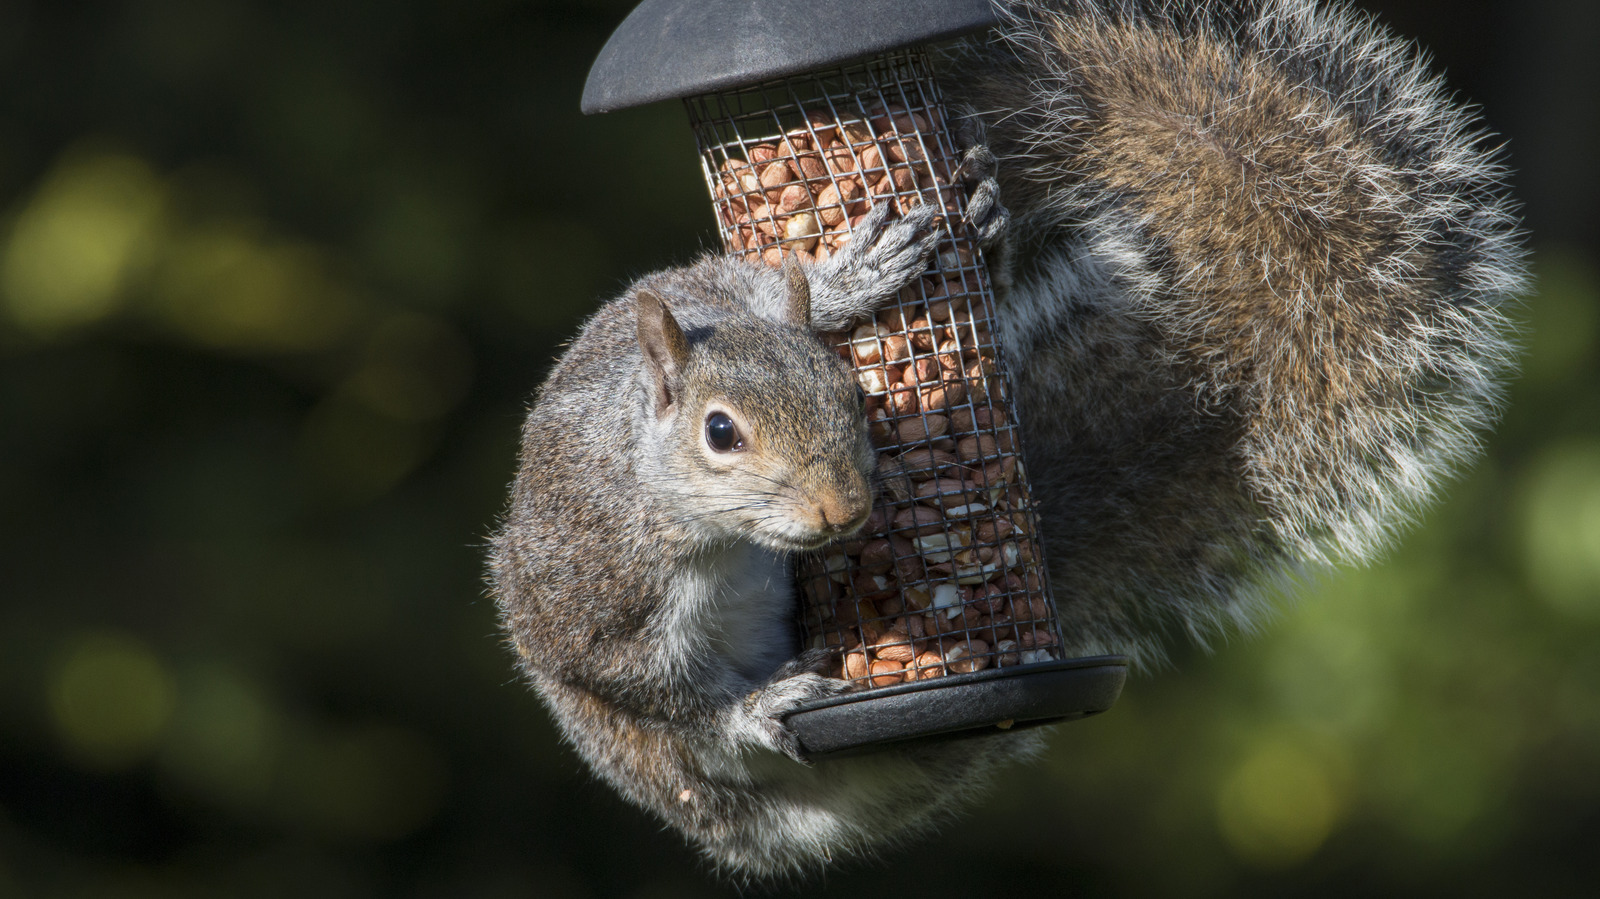 How To Stop Squirrels From Robbing Bird Feeders - For Good!